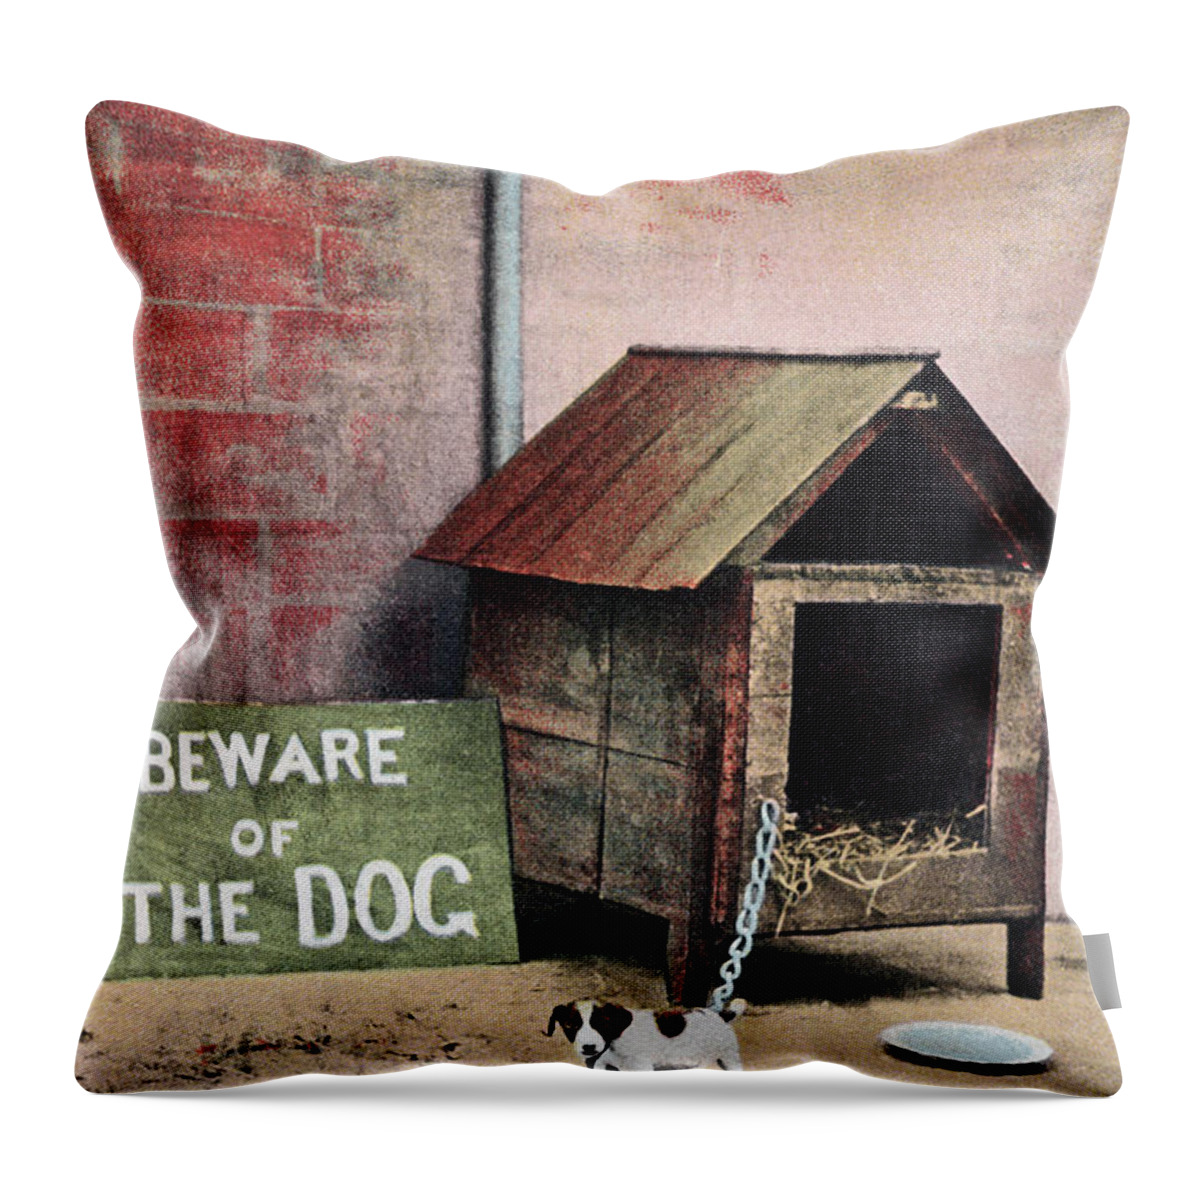 Pets Throw Pillow featuring the photograph Beware Of Dog Sign With Small Dog by Brand X Pictures